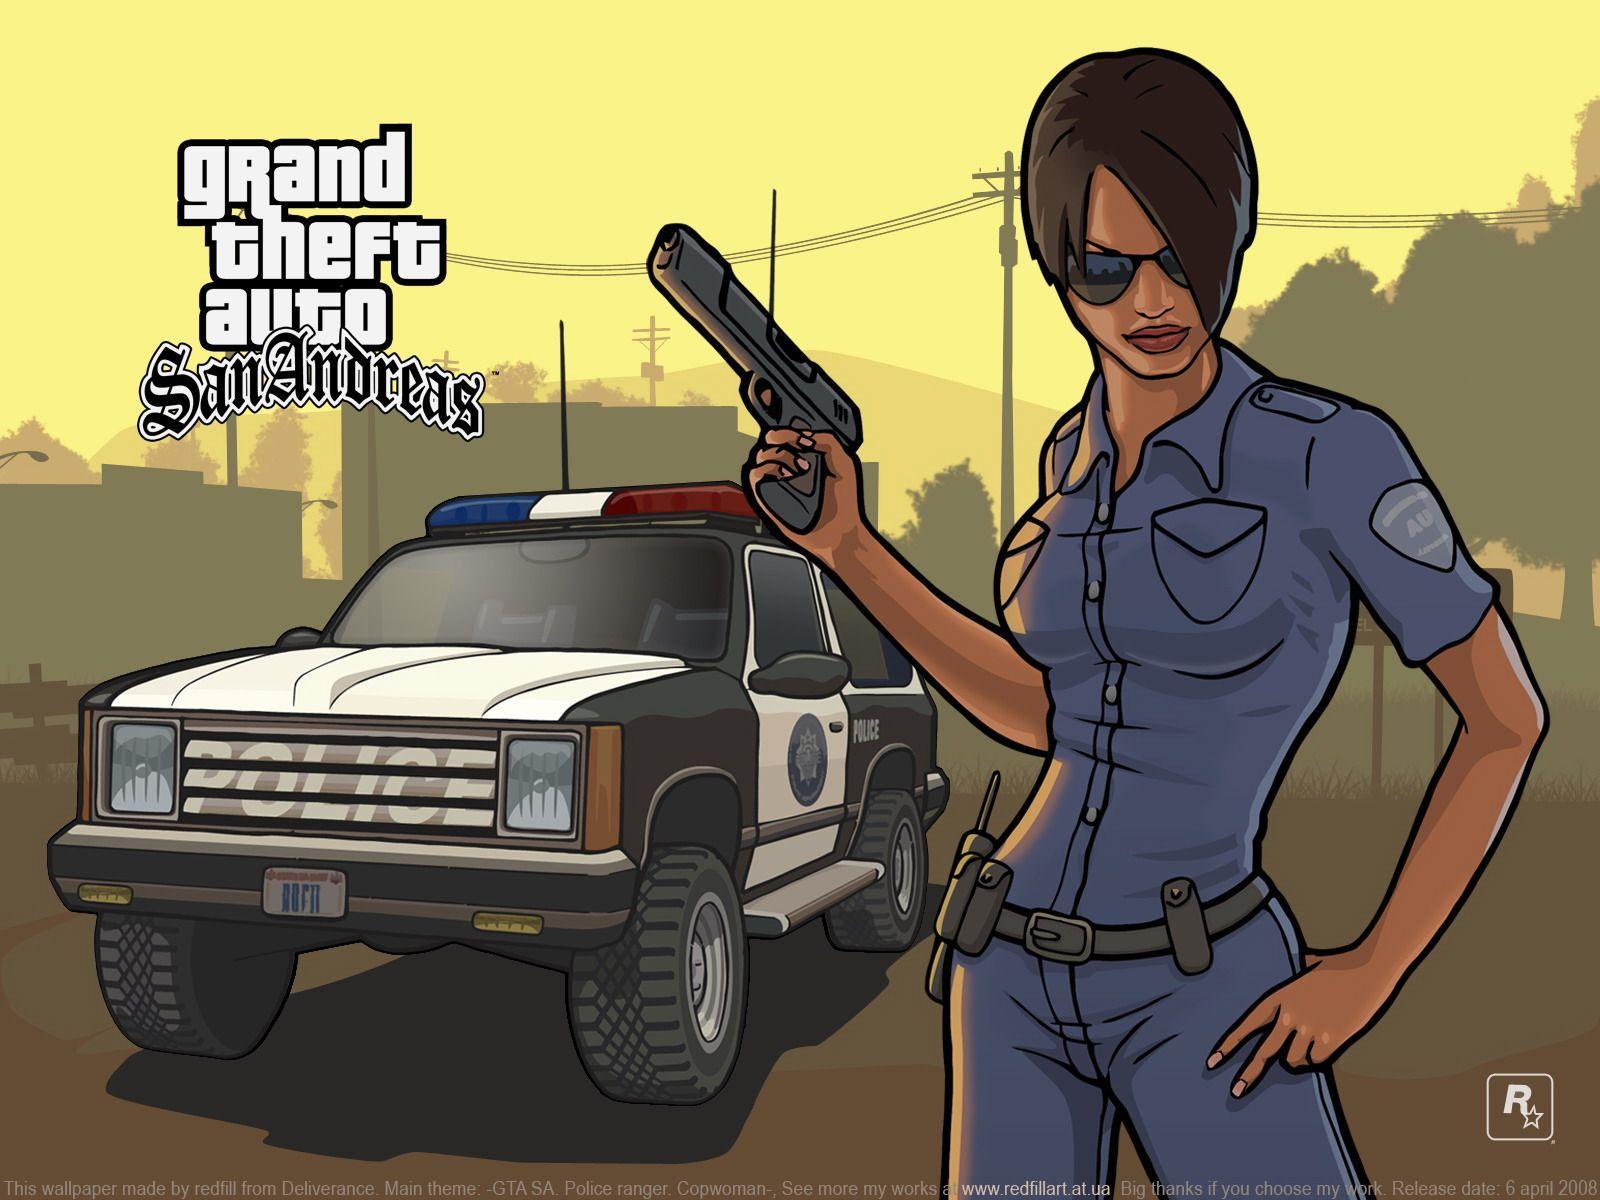 Review of Grand theft auto